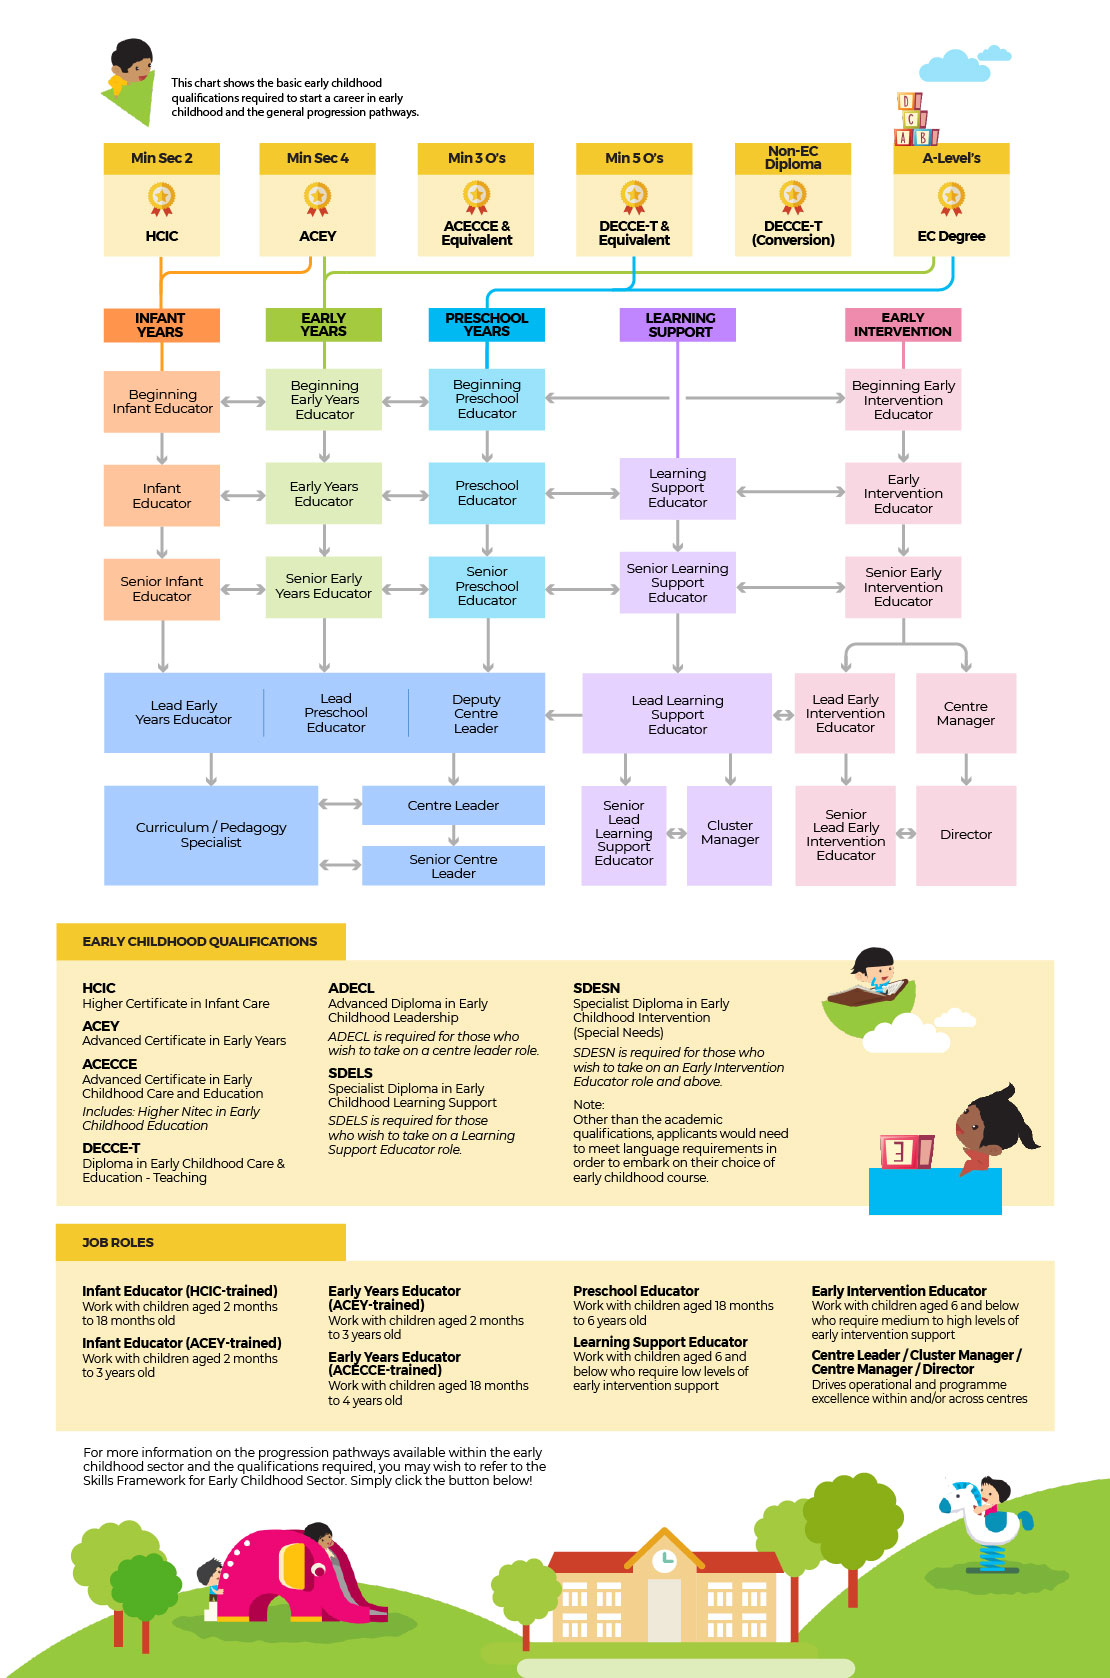 Career paths in early childhood